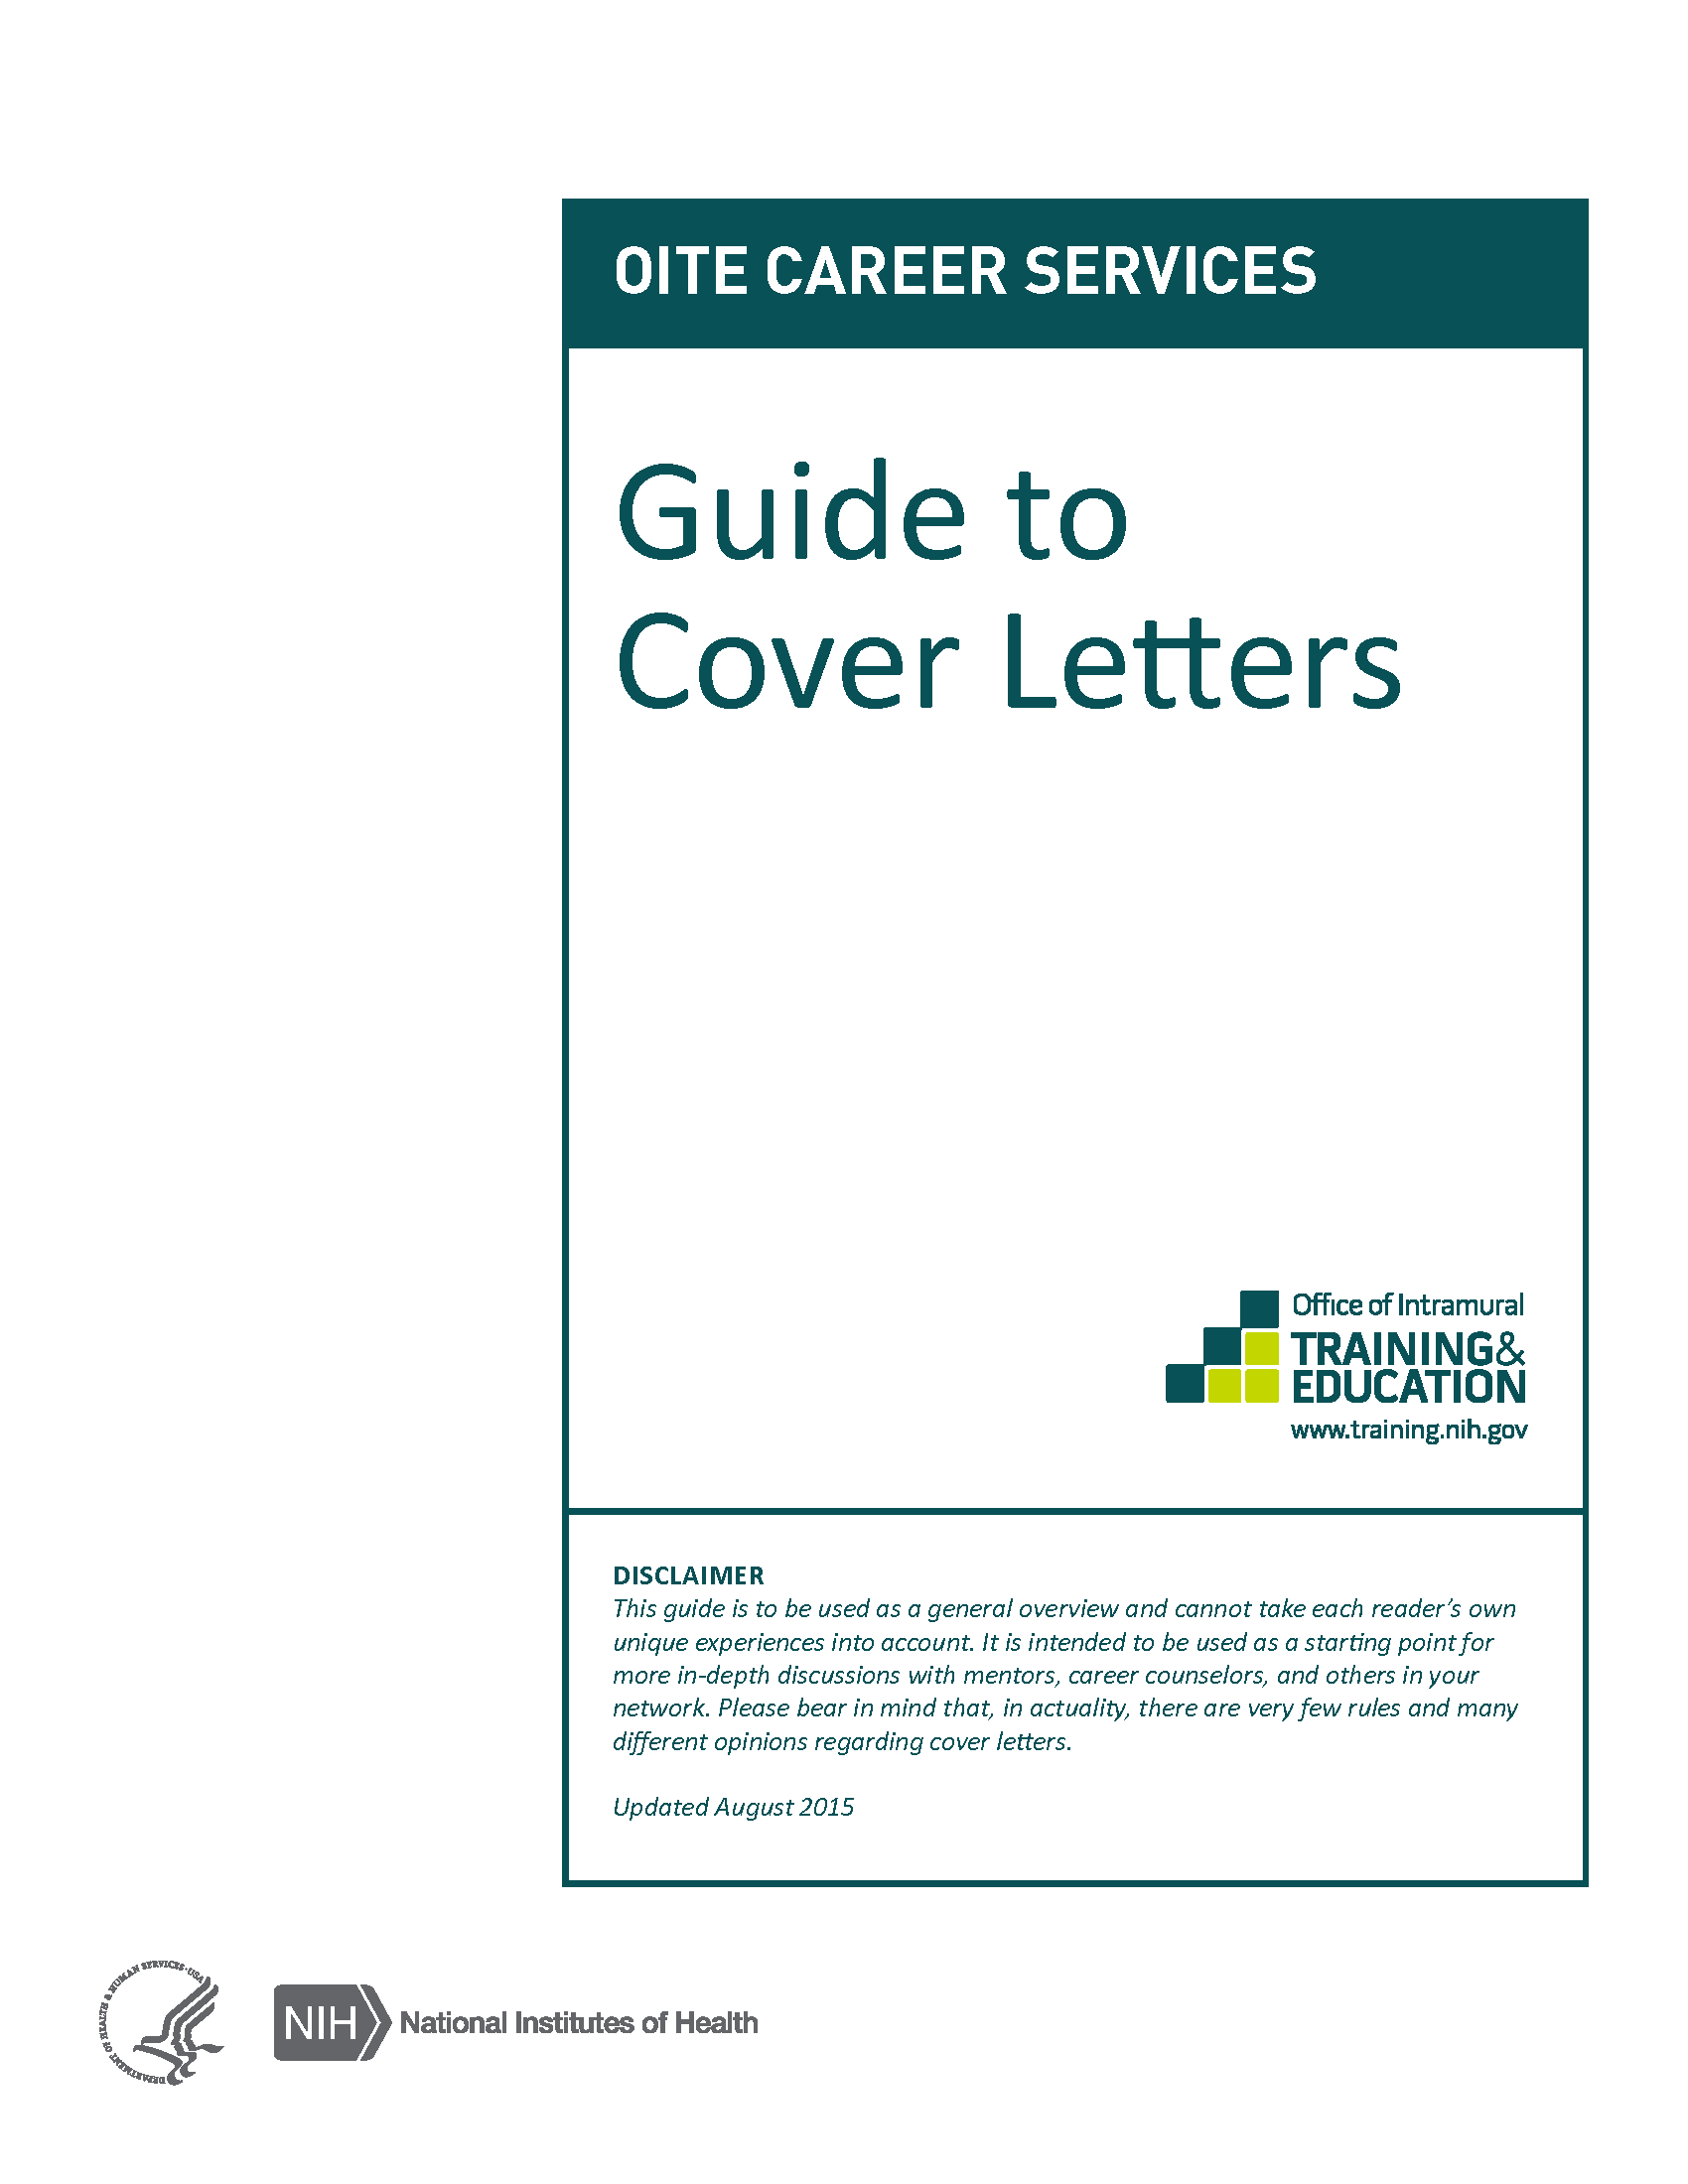 OITE Guide to Cover Letters